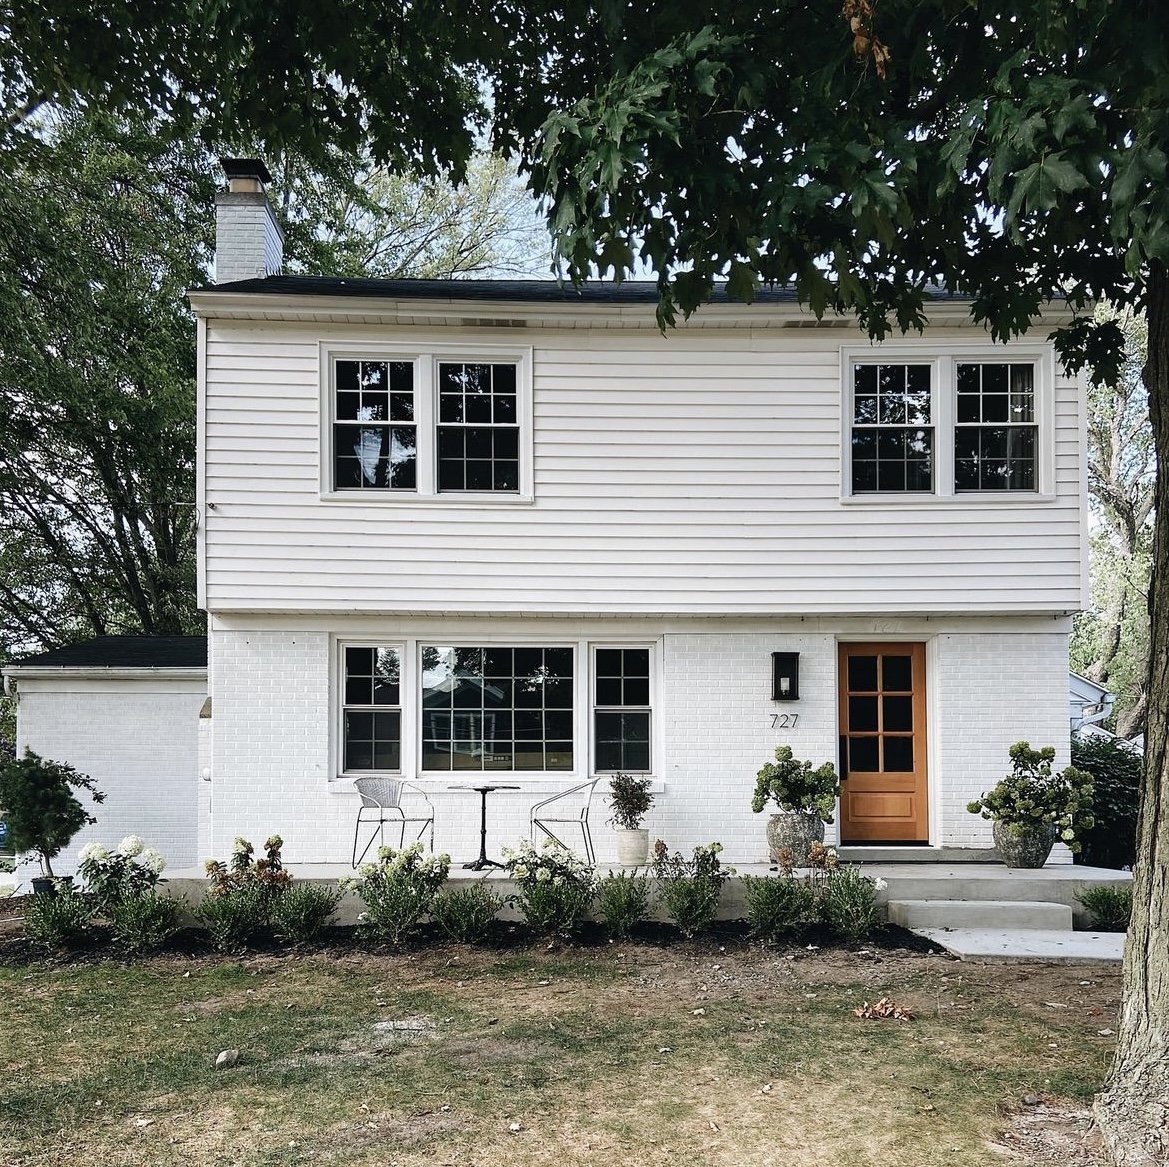 How to add curb appeal and architectural charm to a split level home. 3 ways to update the exterior of a split level home. Image via Brick & Batten